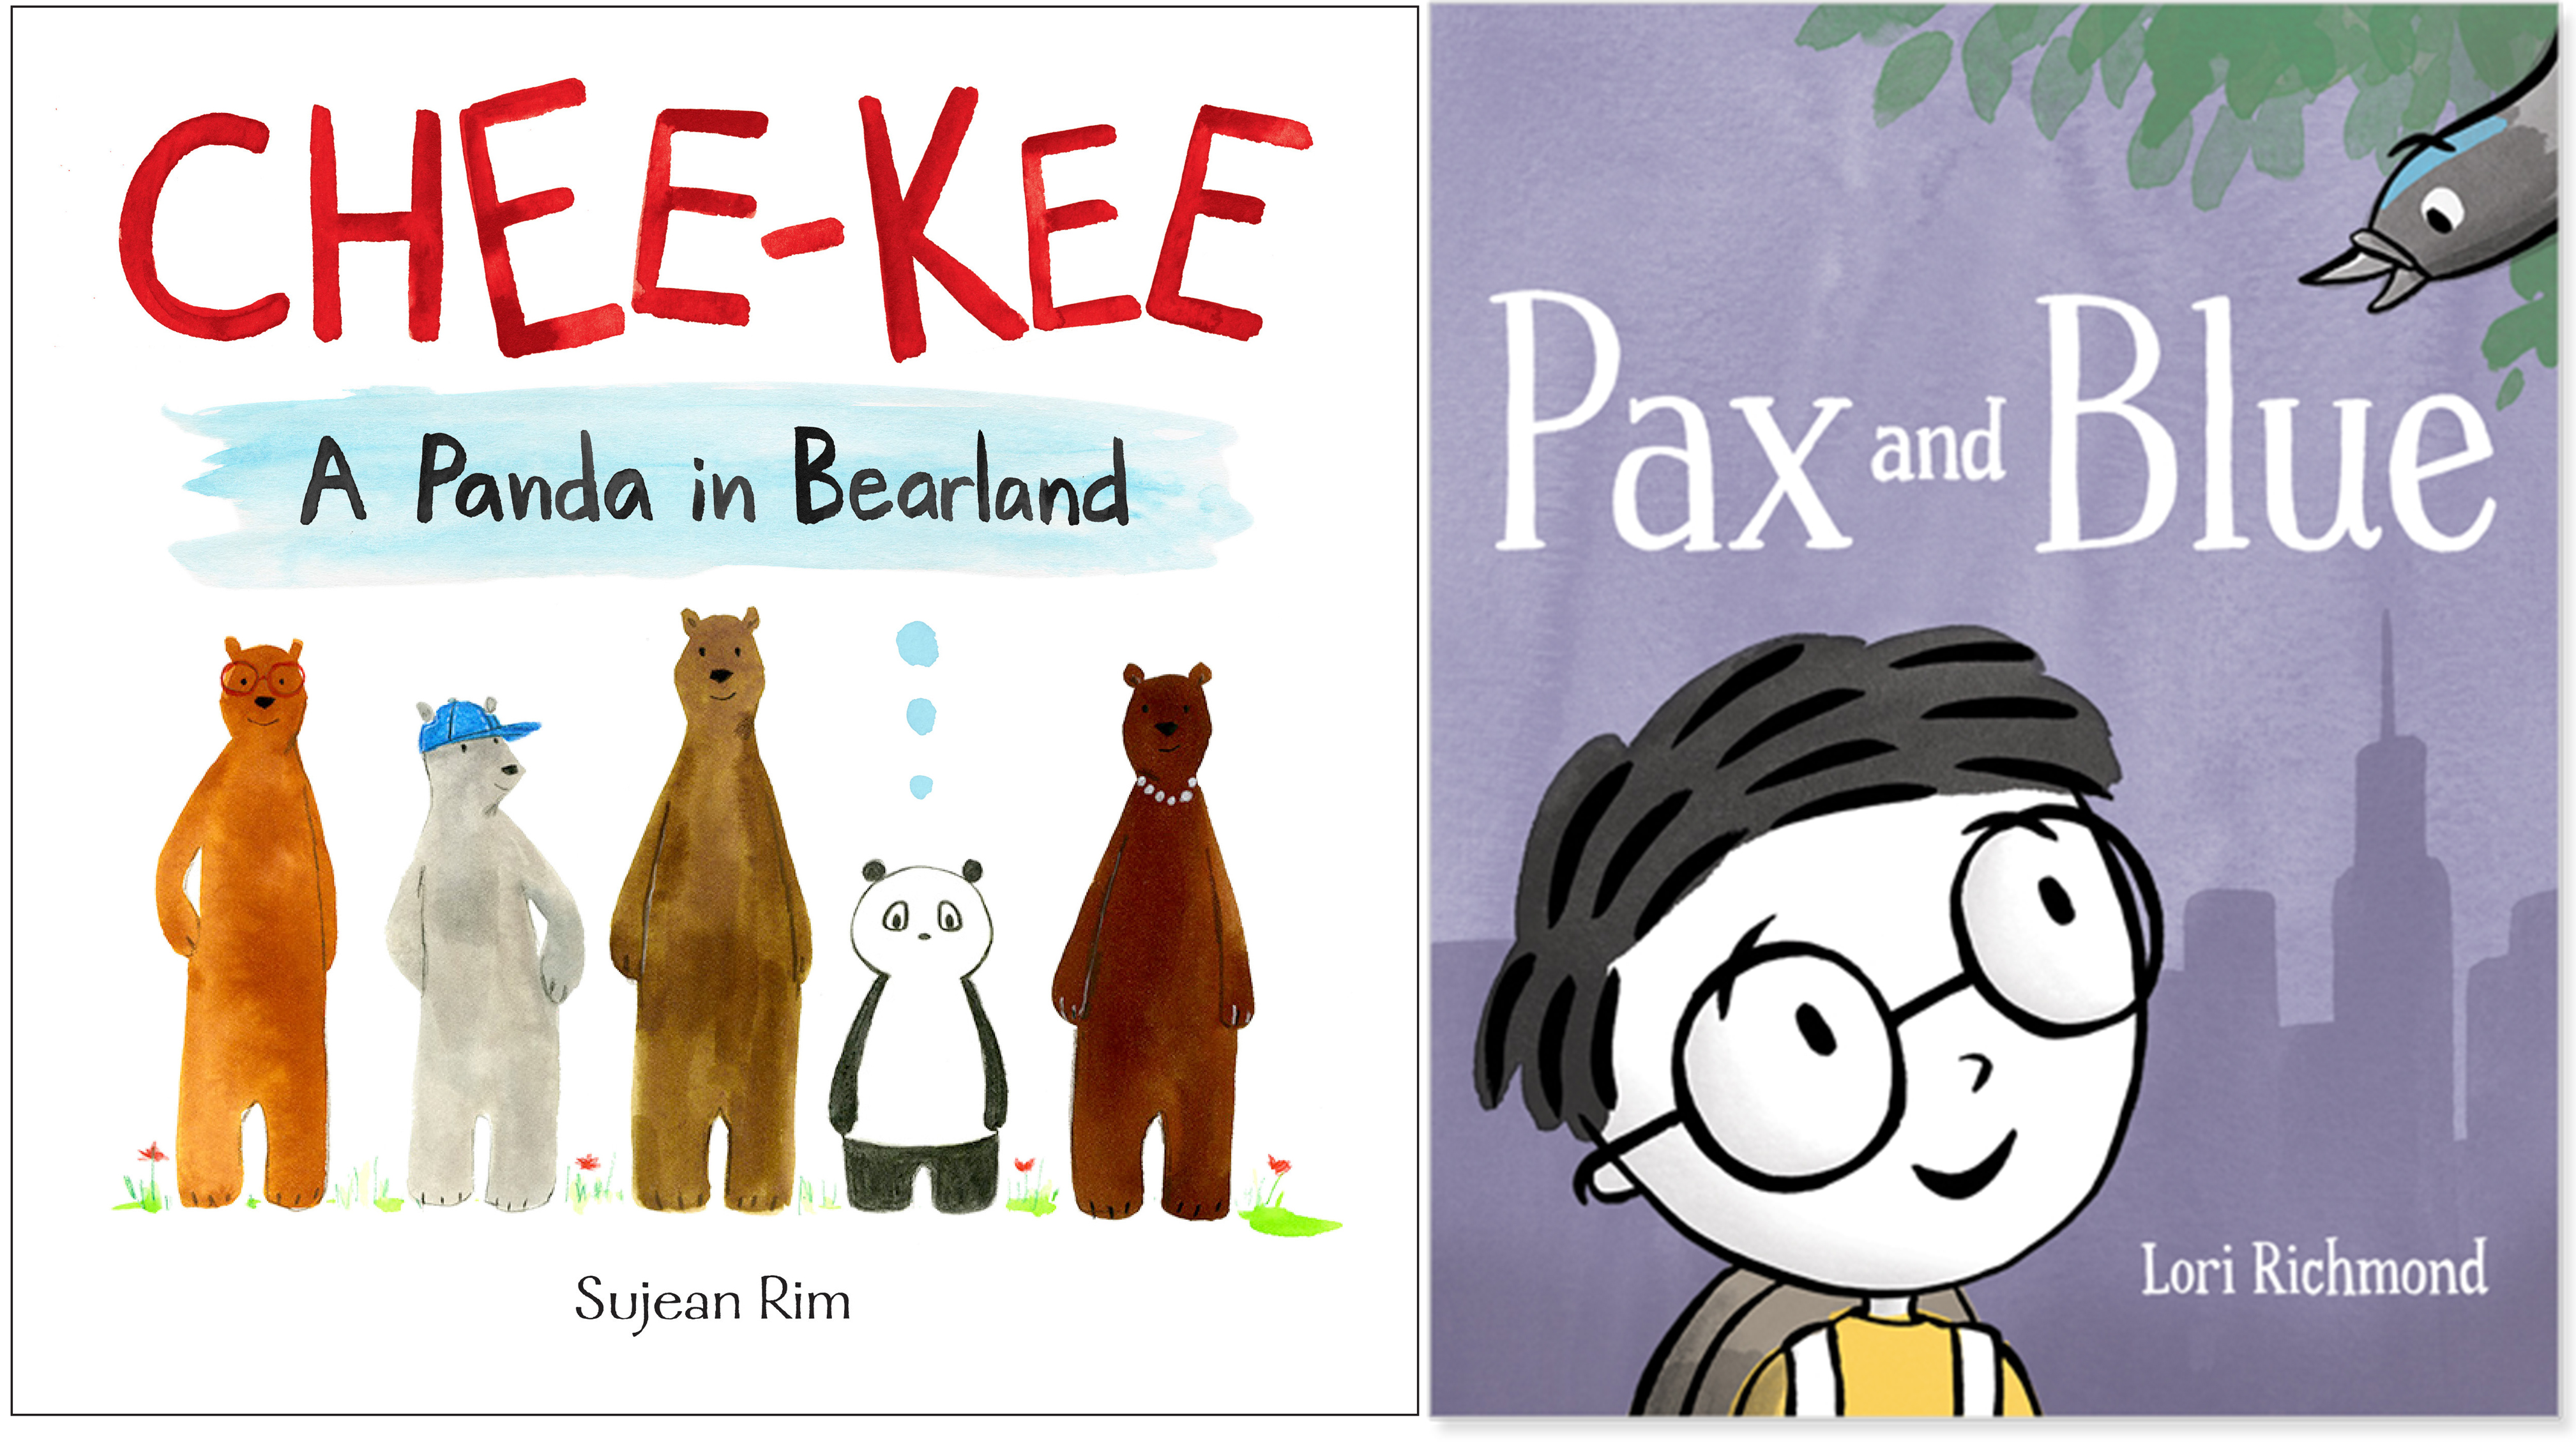 Sunday Story Time with Lori Richmond (Author of Pax and Blue) and Sujean Rim (Author of Chee-Kee)